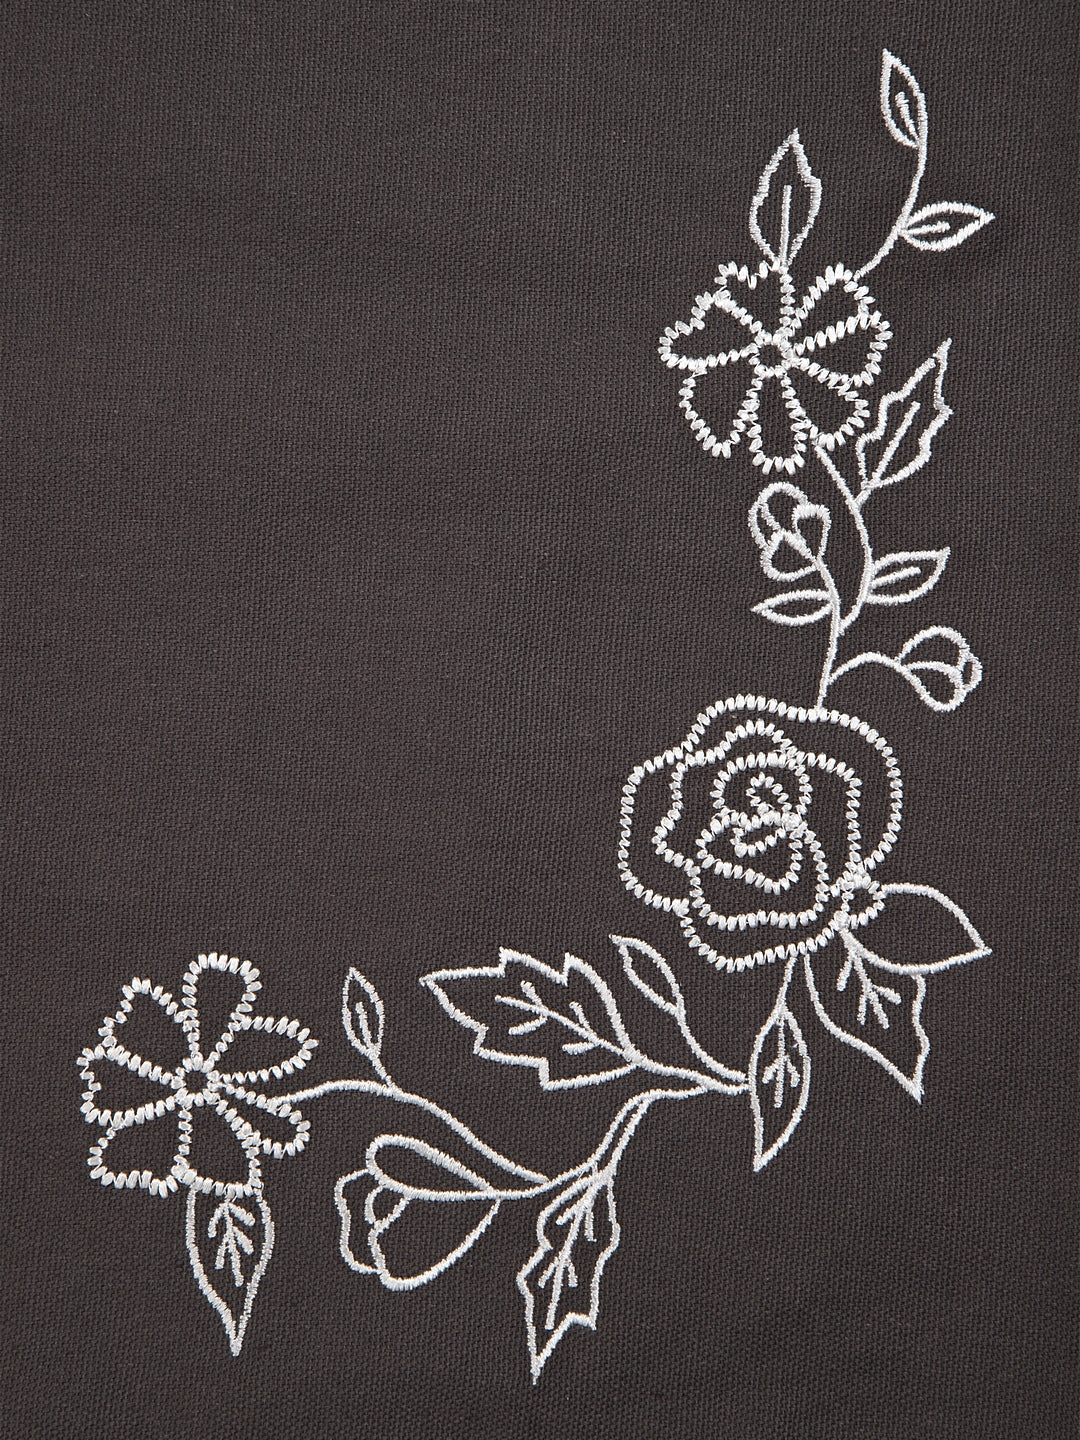 Set of 8 White Rose Embroidered Placemats